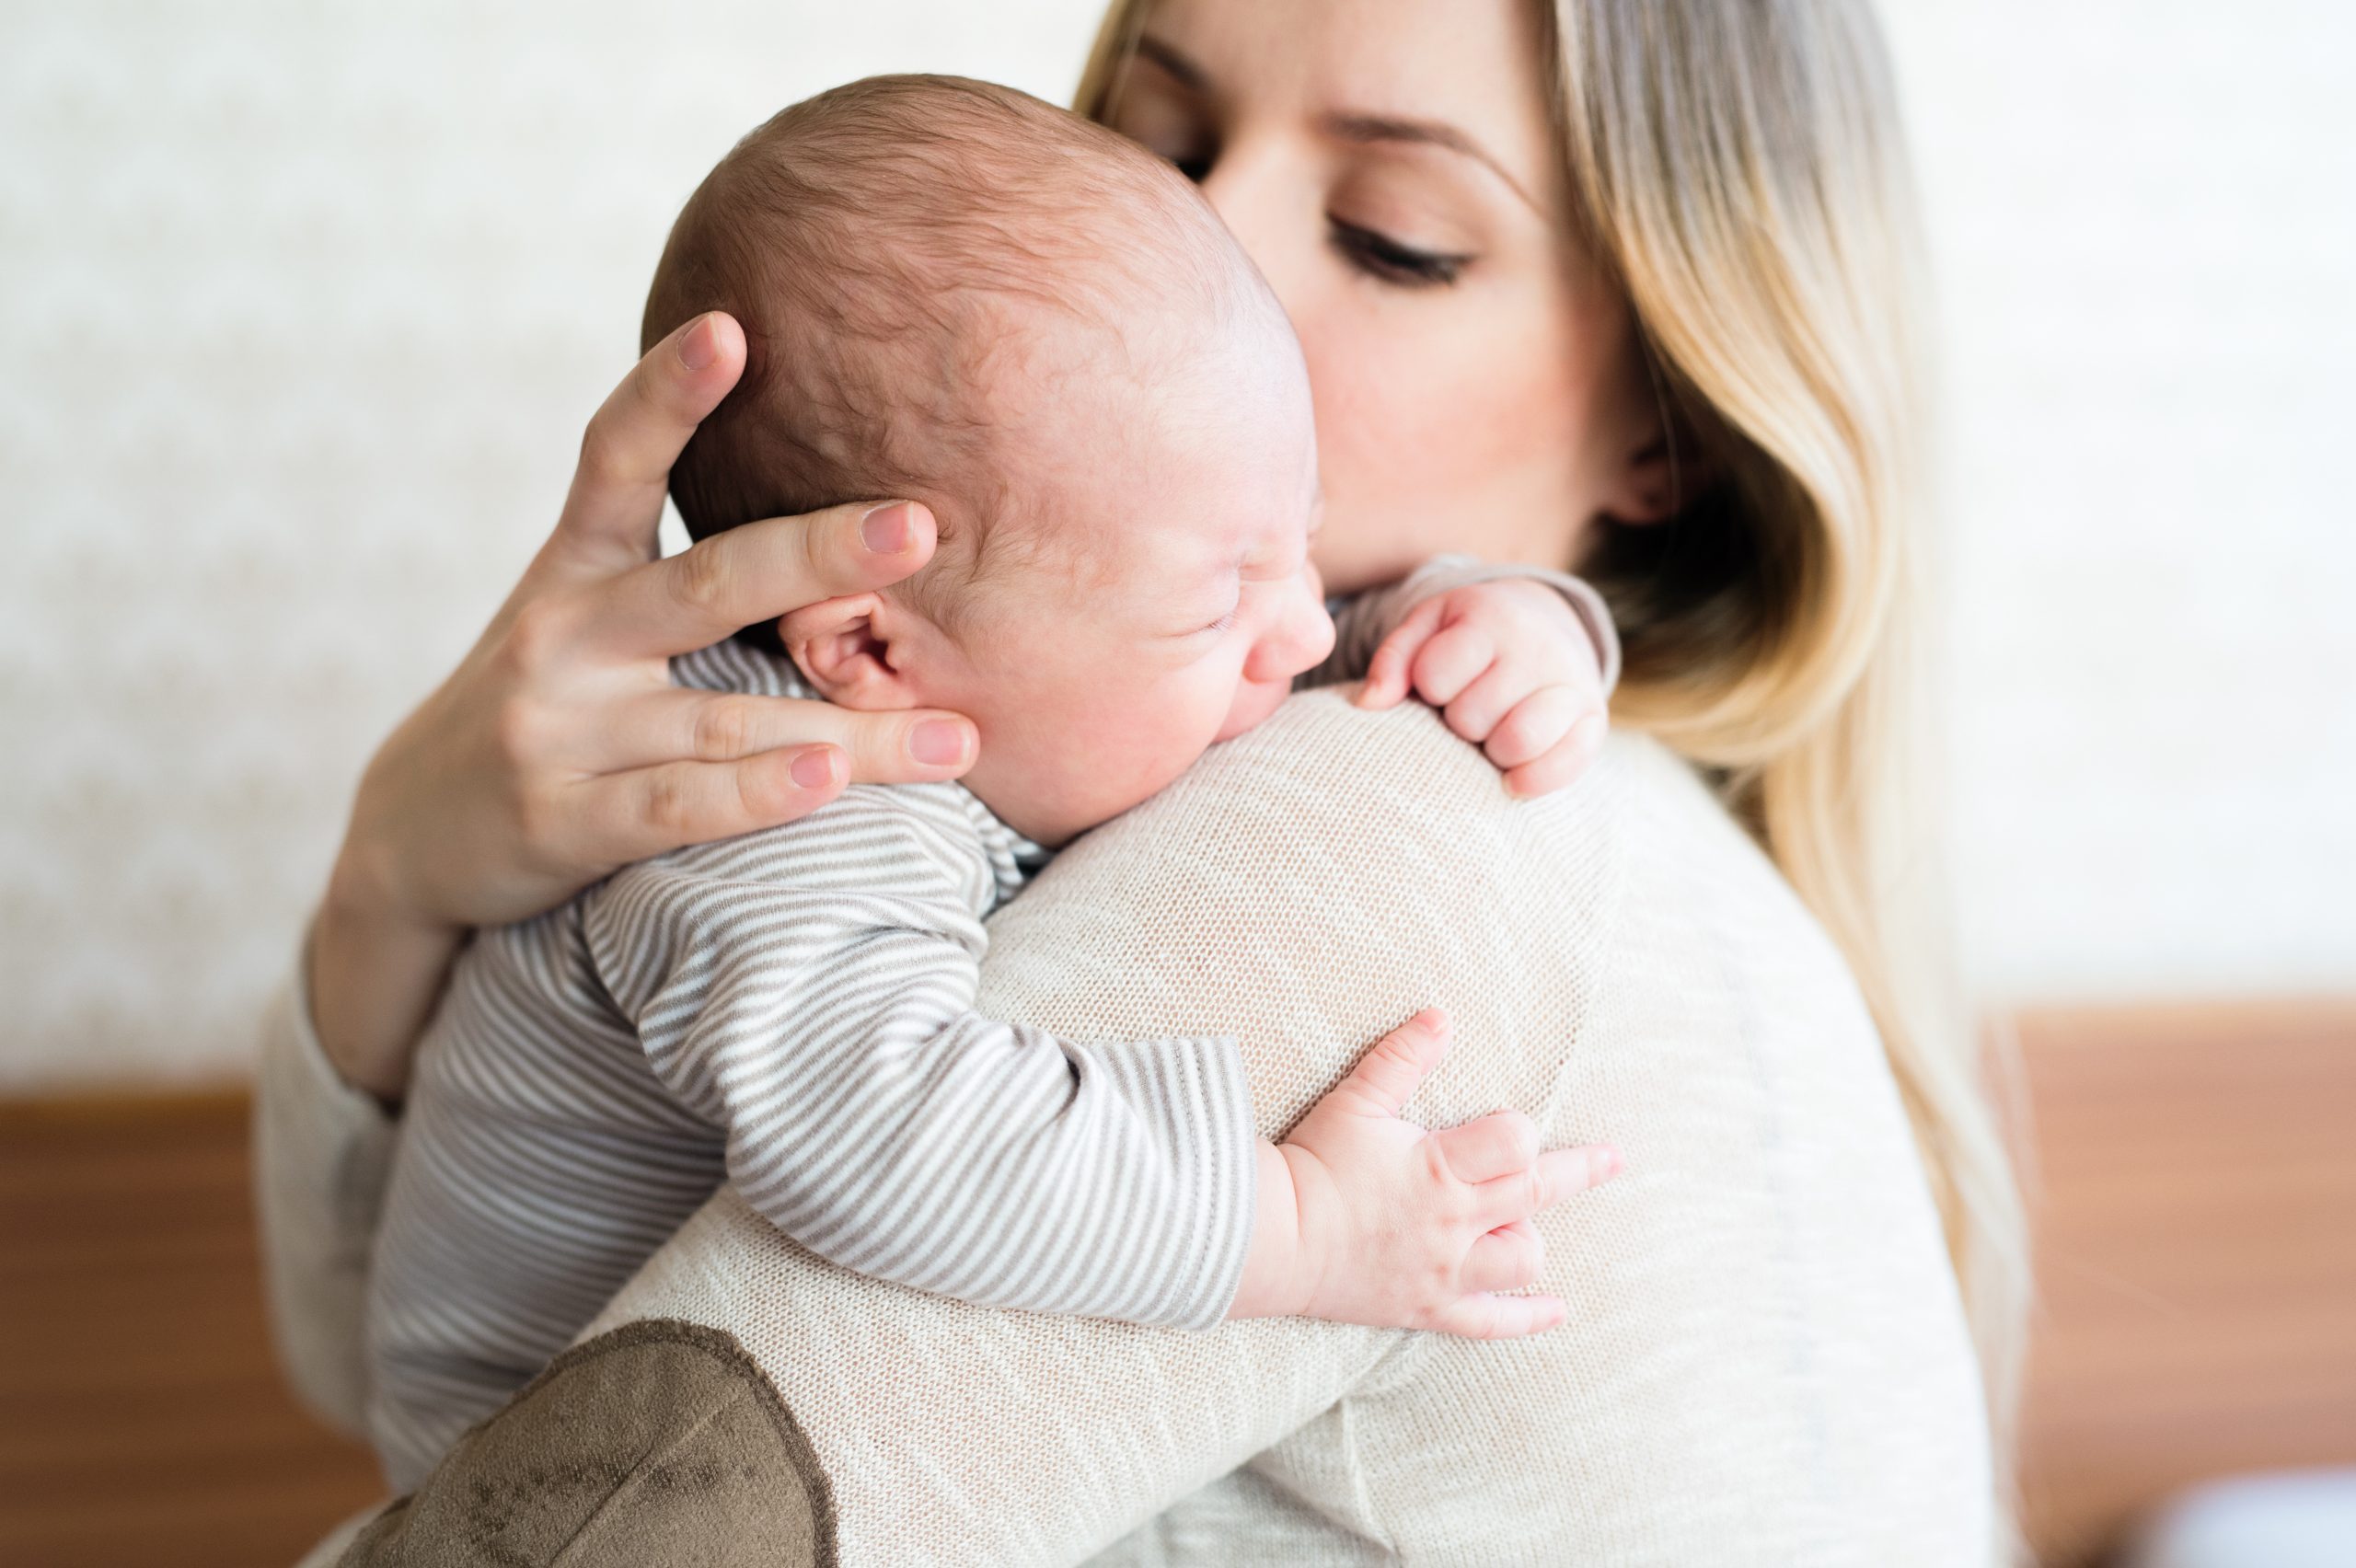 The witching hour: what to do when your baby gets fussy